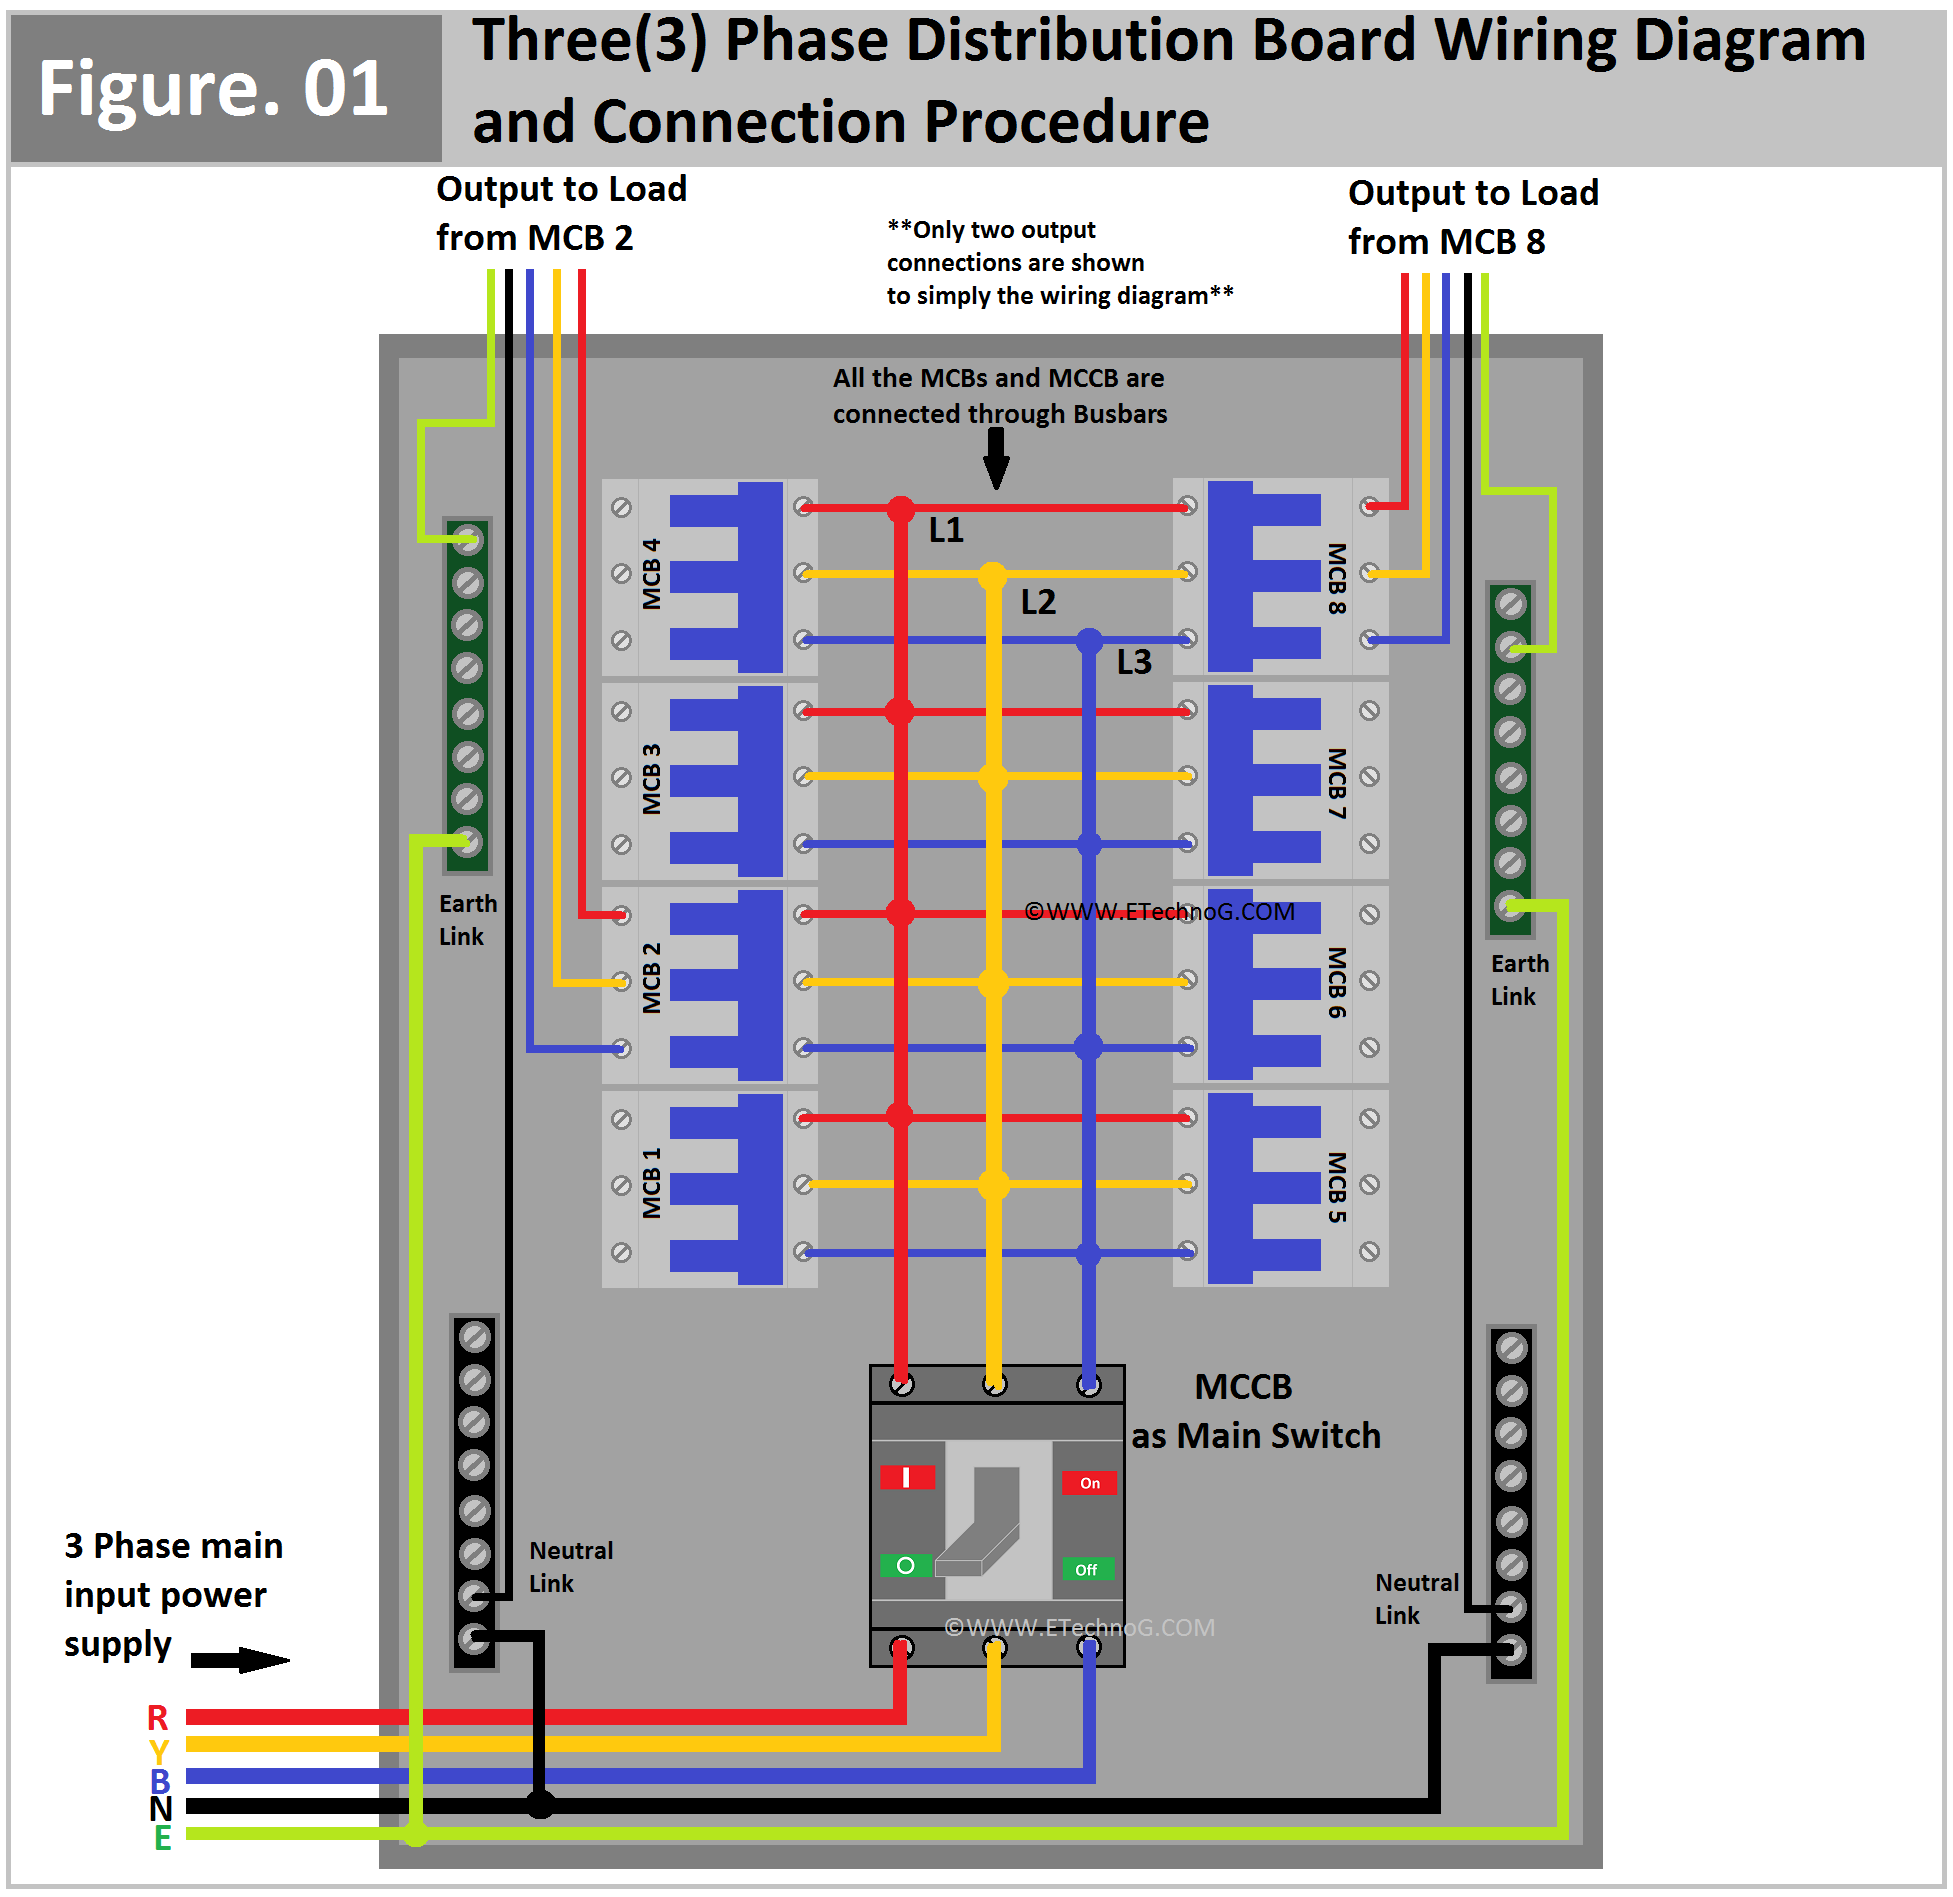 Three(3) Phase Distribution Board Wiring Diagram and Connection Procedure